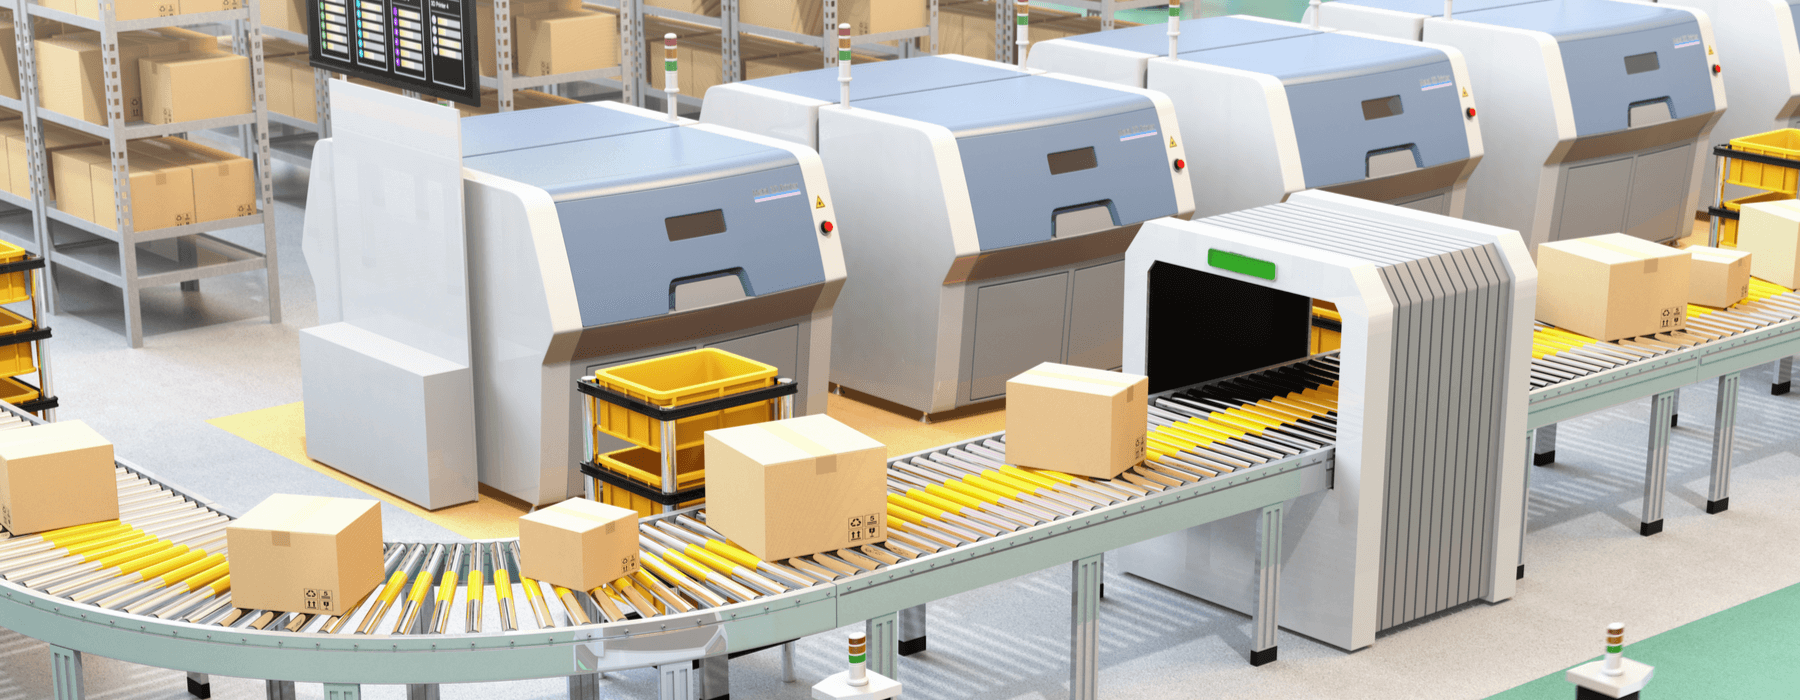 Are Micro-Fulfillment Centers Affected by the LL97 Emission Limits?